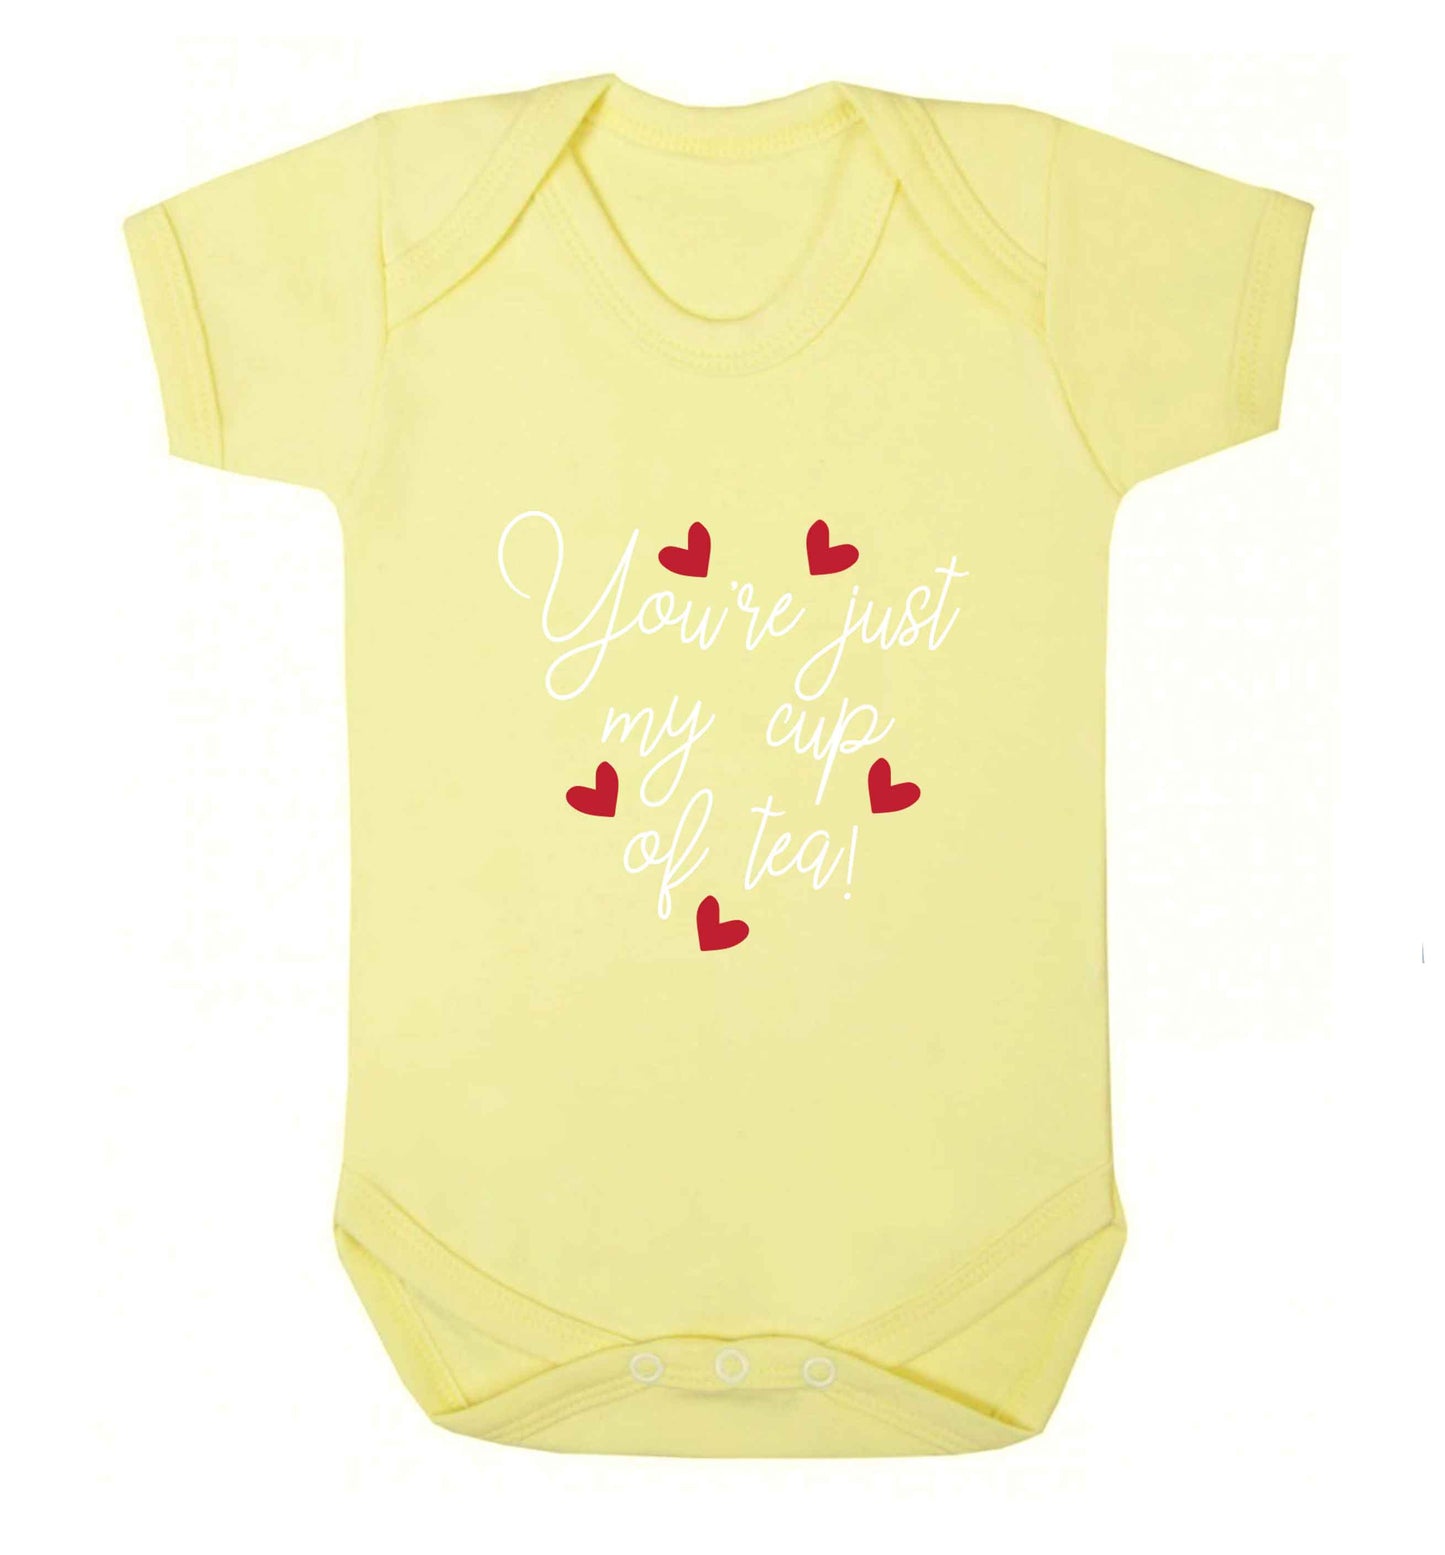 You're just my cup of tea baby vest pale yellow 18-24 months